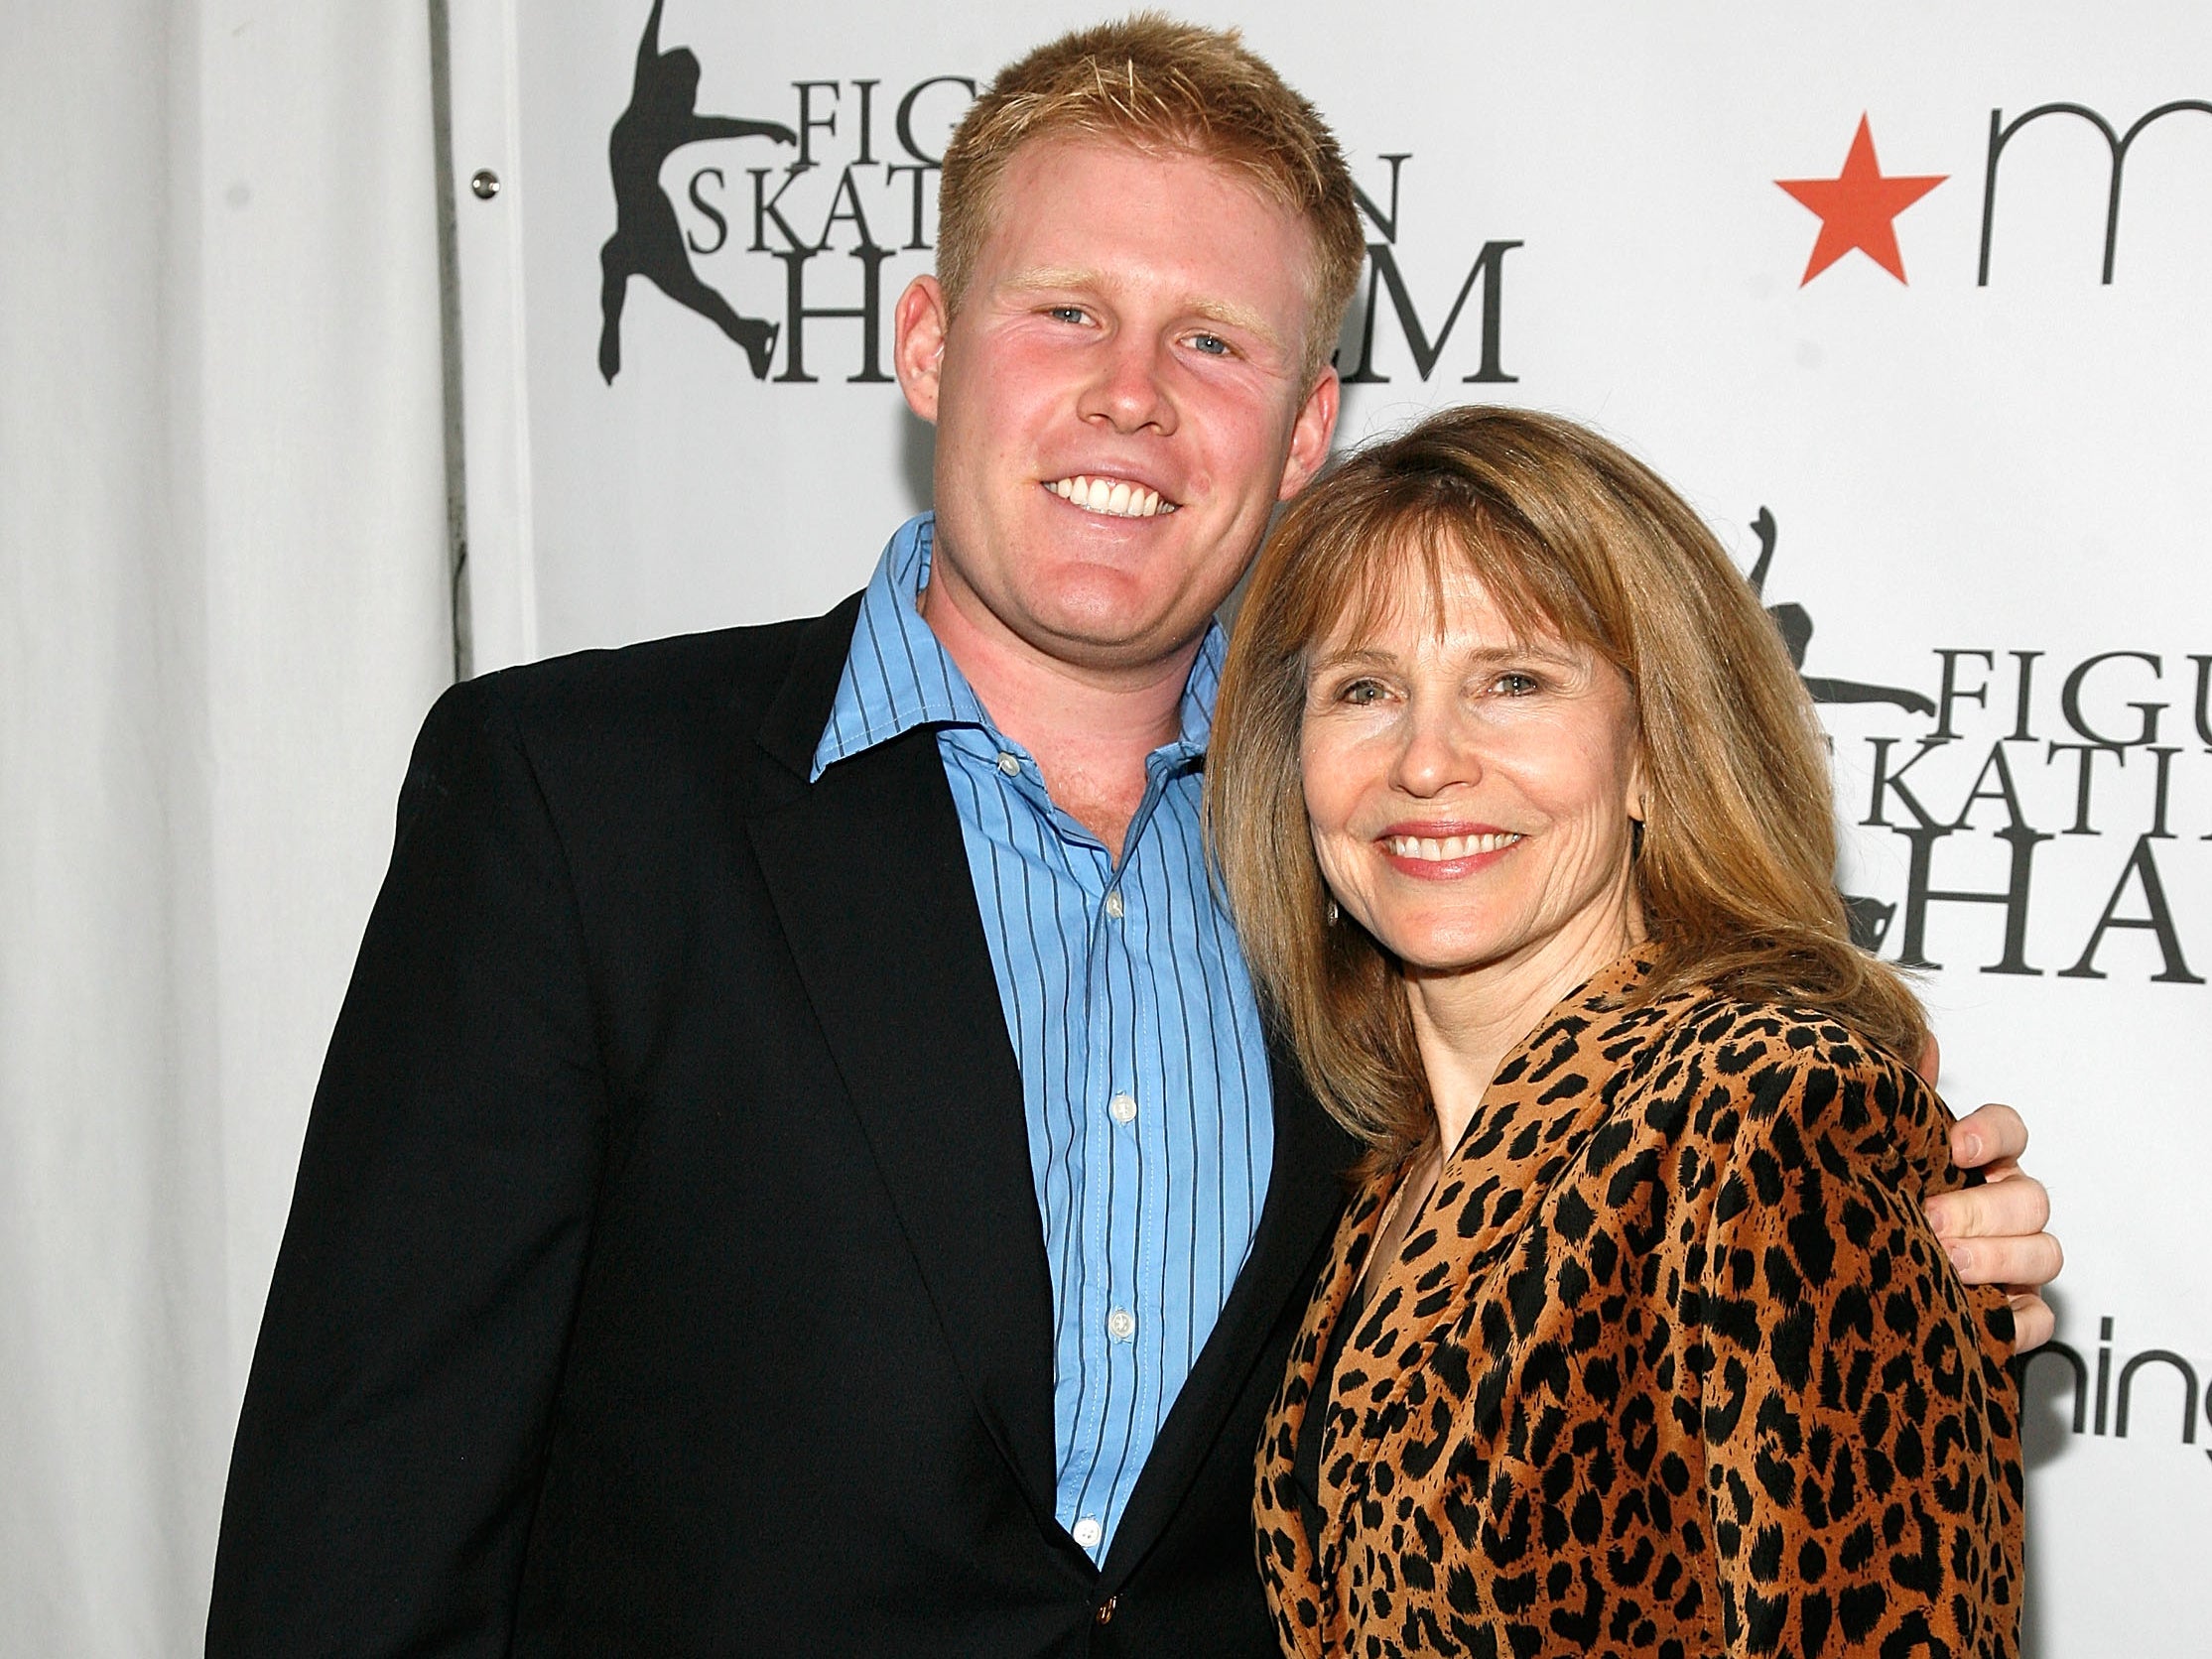 NEW YORK, NY - APRIL 04: Andrew Giuliani and Donna Hanover attend the 2011 Skating With the Stars Gala at Wollman Rink - Central Park on April 4, 2011 in New York City. (Photo by Andy Kropa/Getty Images)